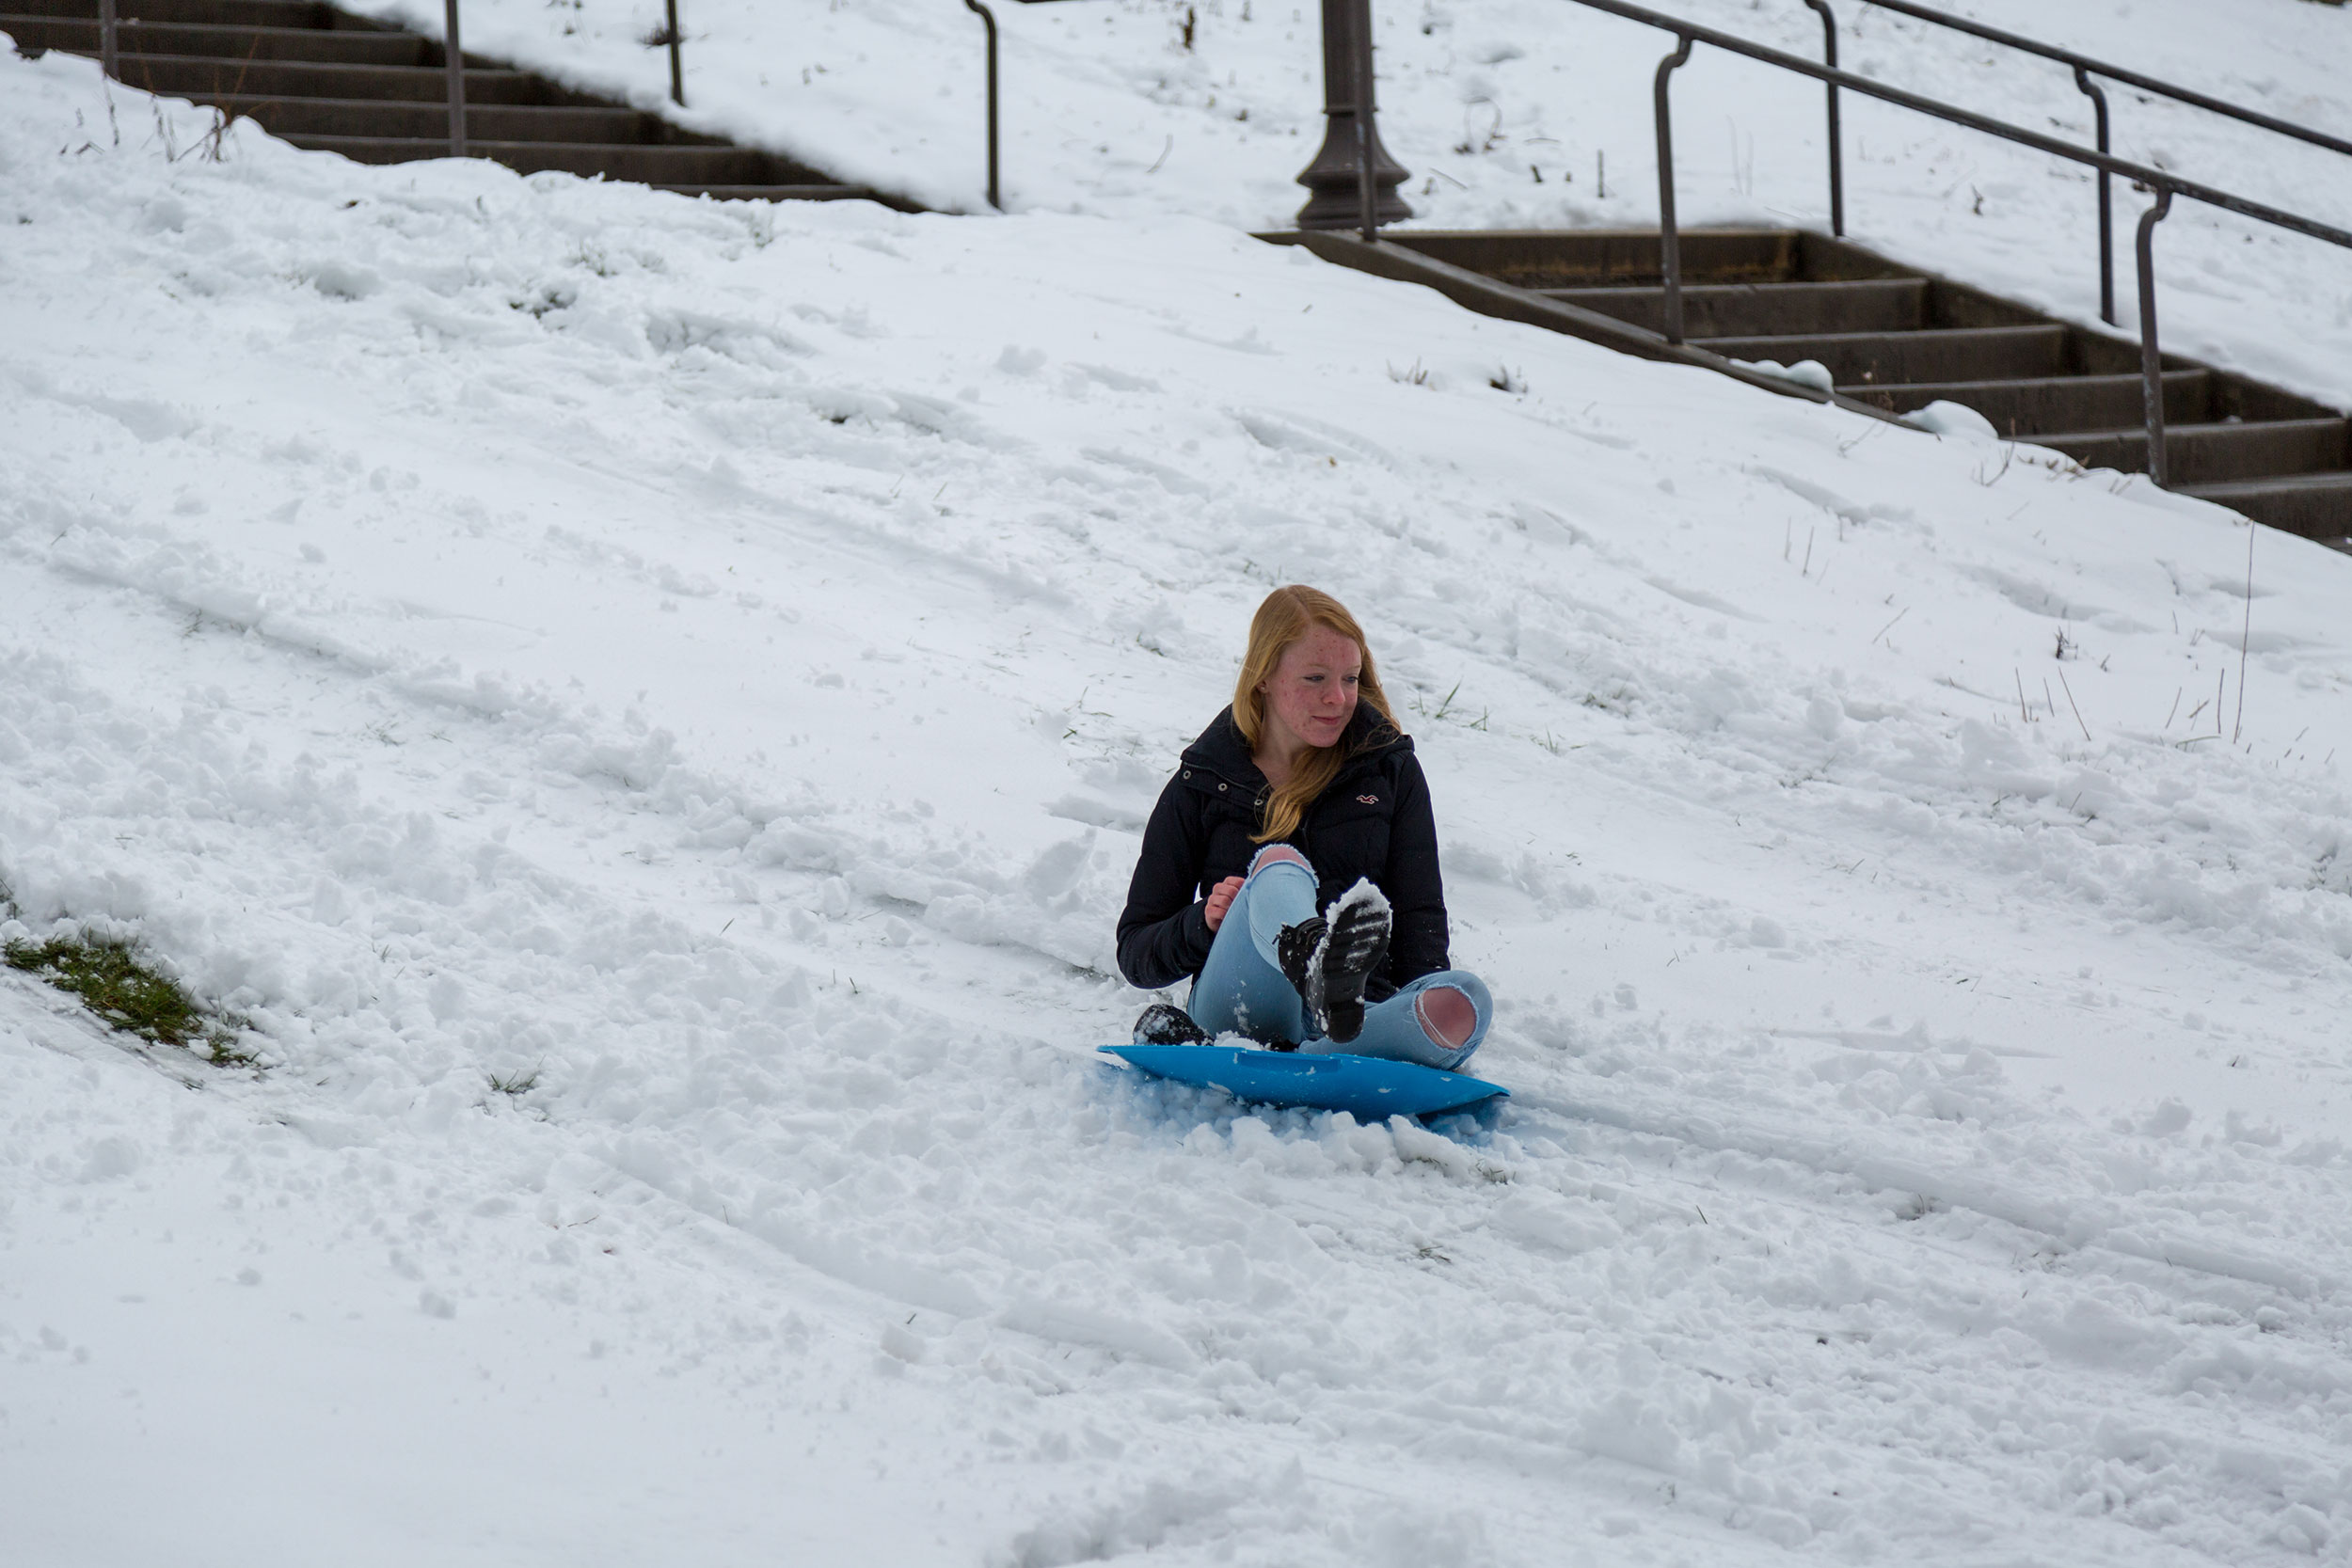 A student slides down a hill on a snow day in March.